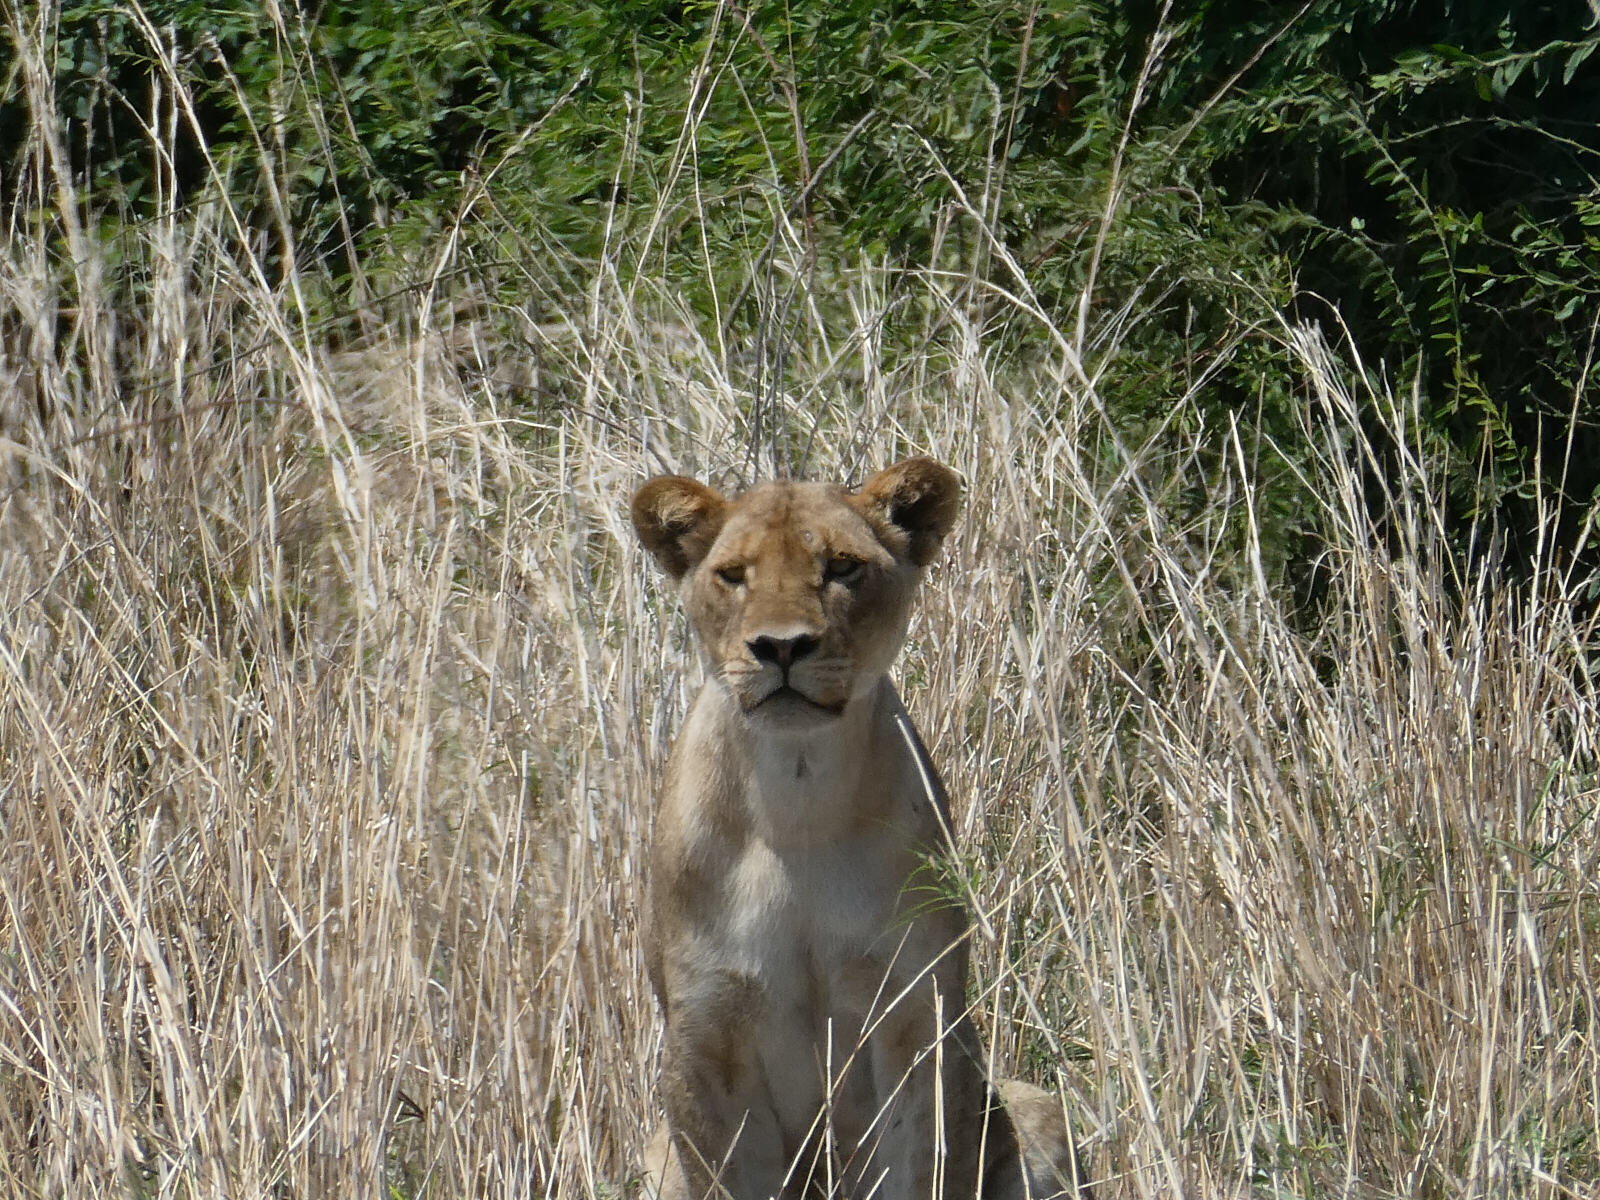 A lioness in Chobe national park, Botswana